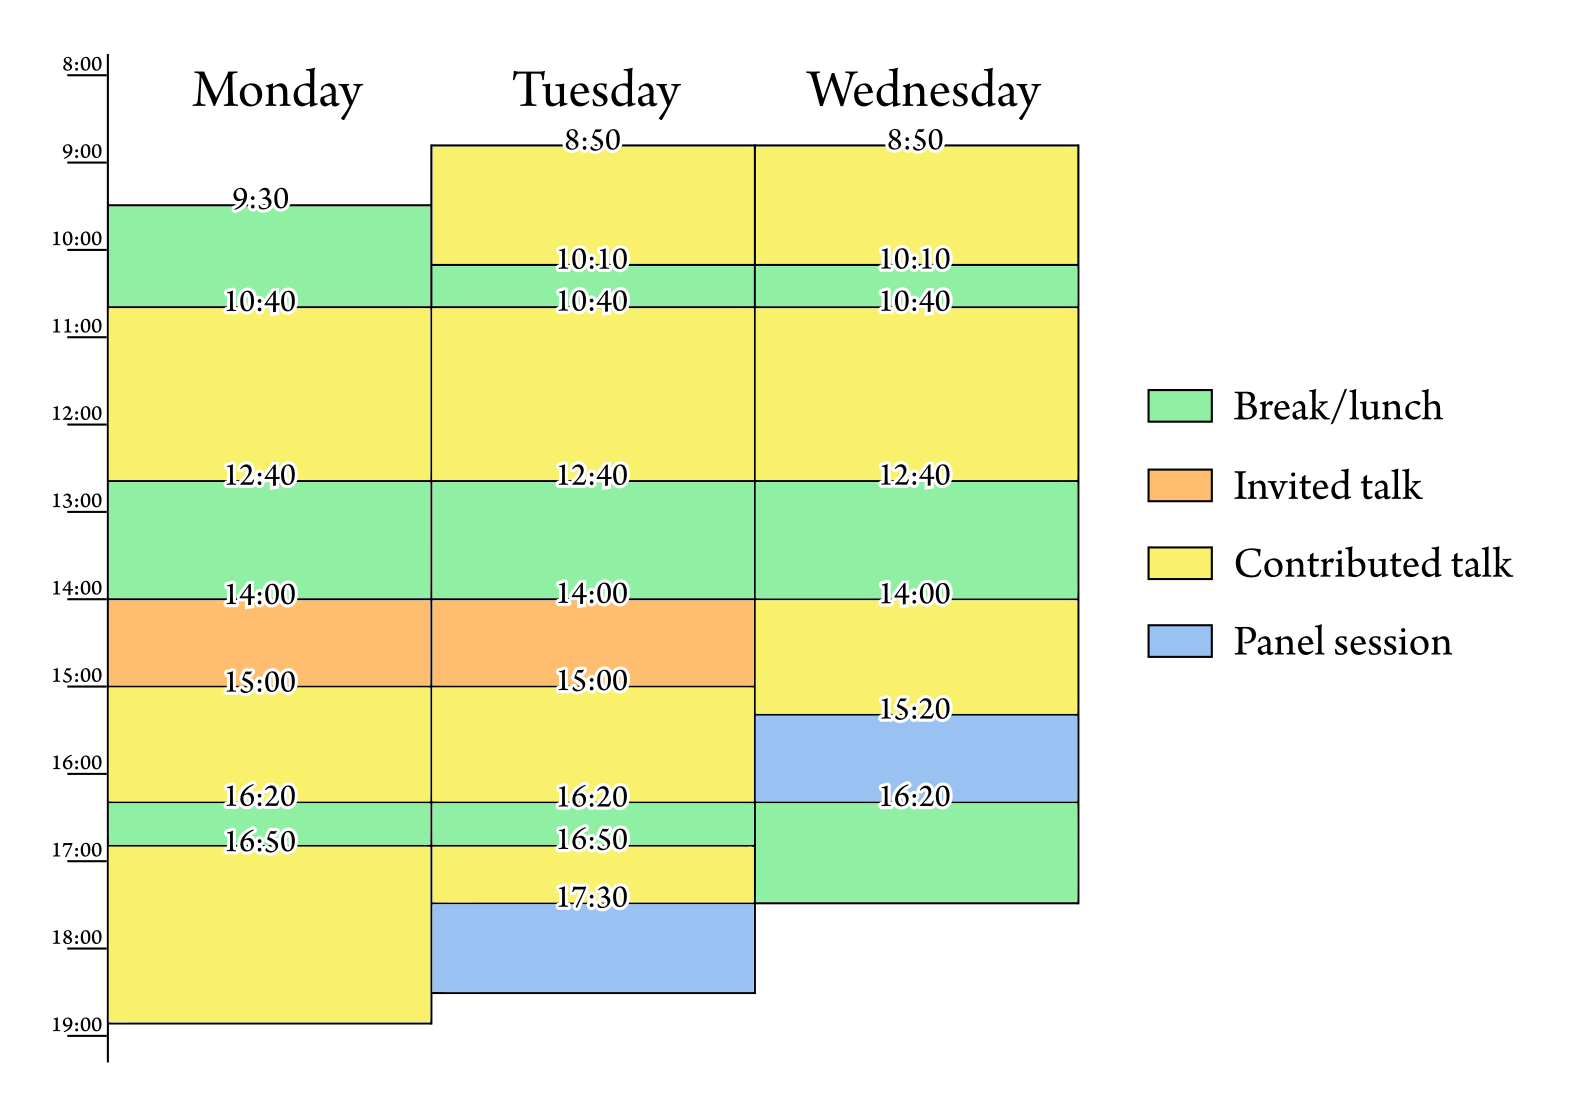 Schedule in graphical form, summarizes info given above.